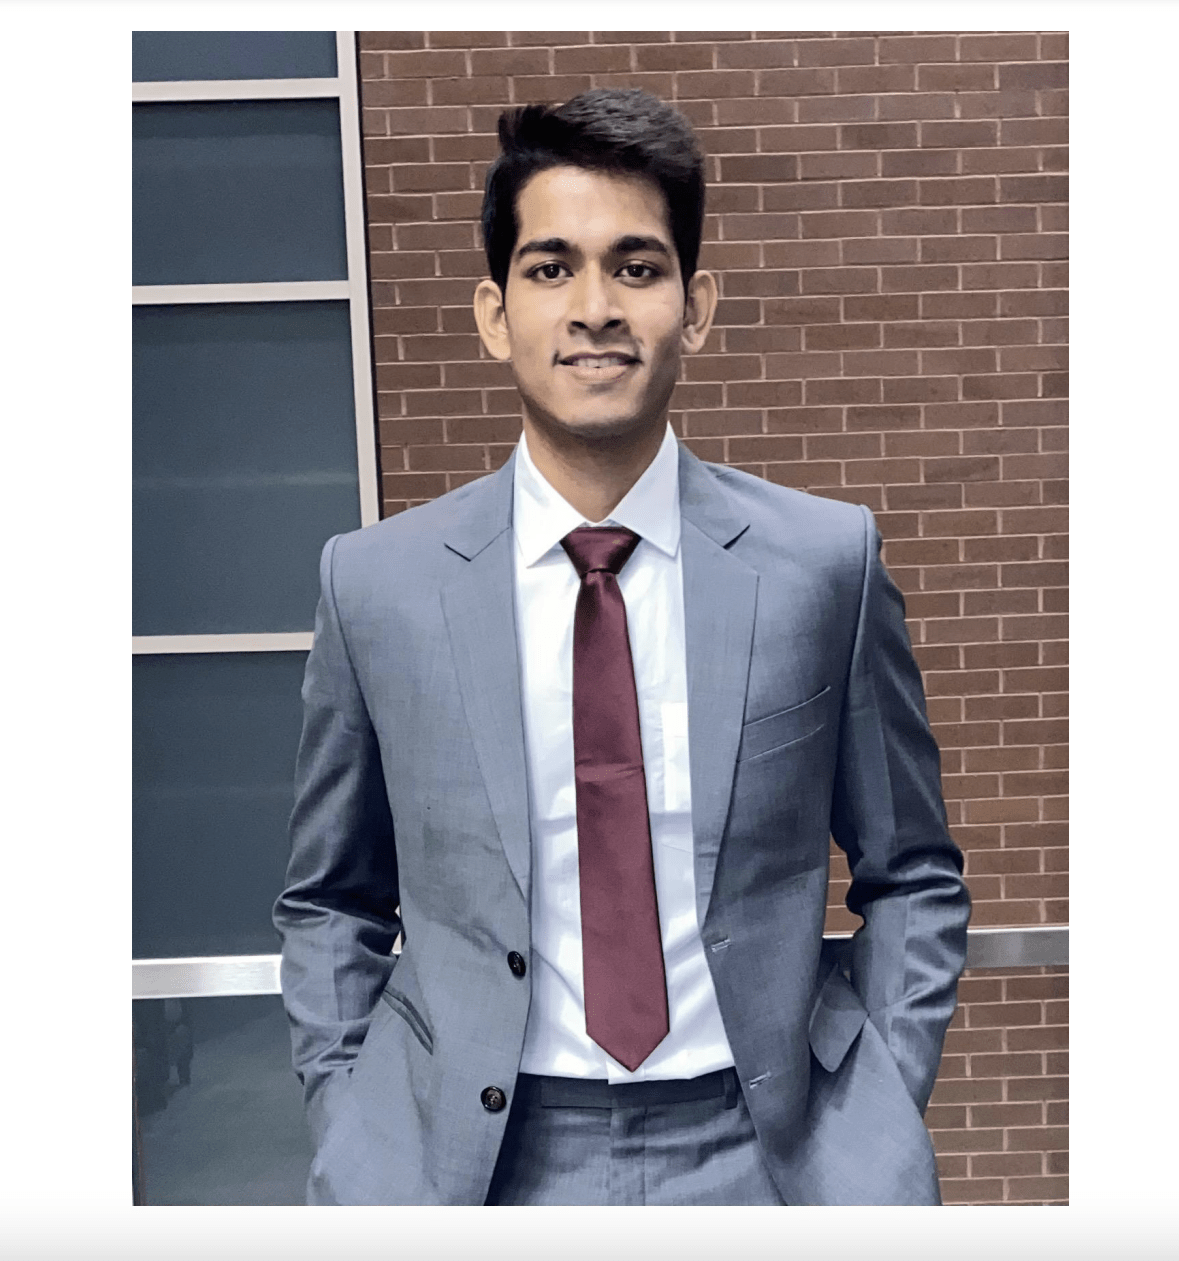 Story of a 23-year-old student from Gujarat who mastered Digital Marketing & now making a mark in the USA!